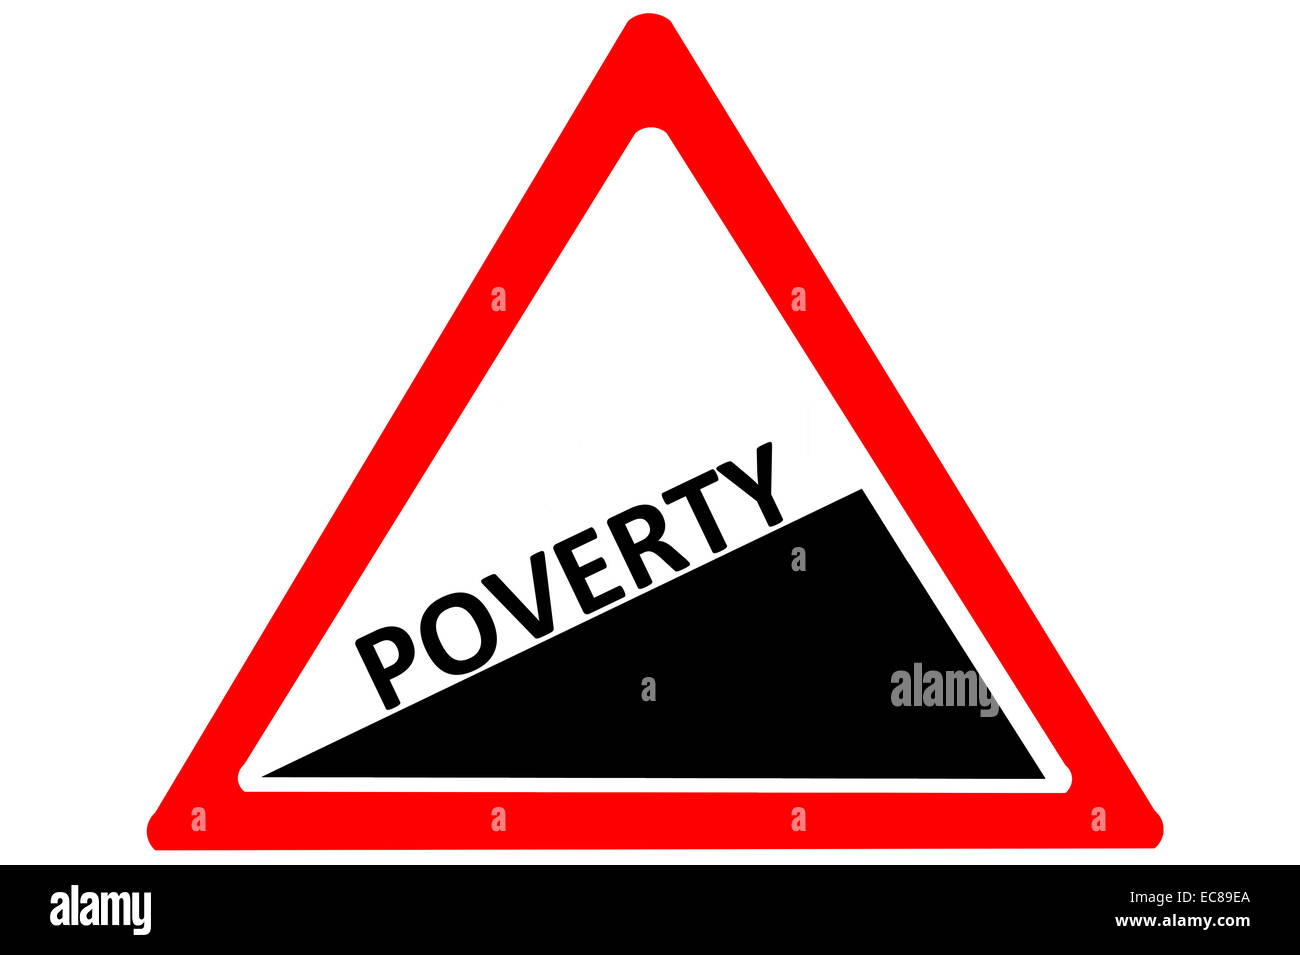 Poverty increasing warning road sign isolated on pure white background Stock Photo